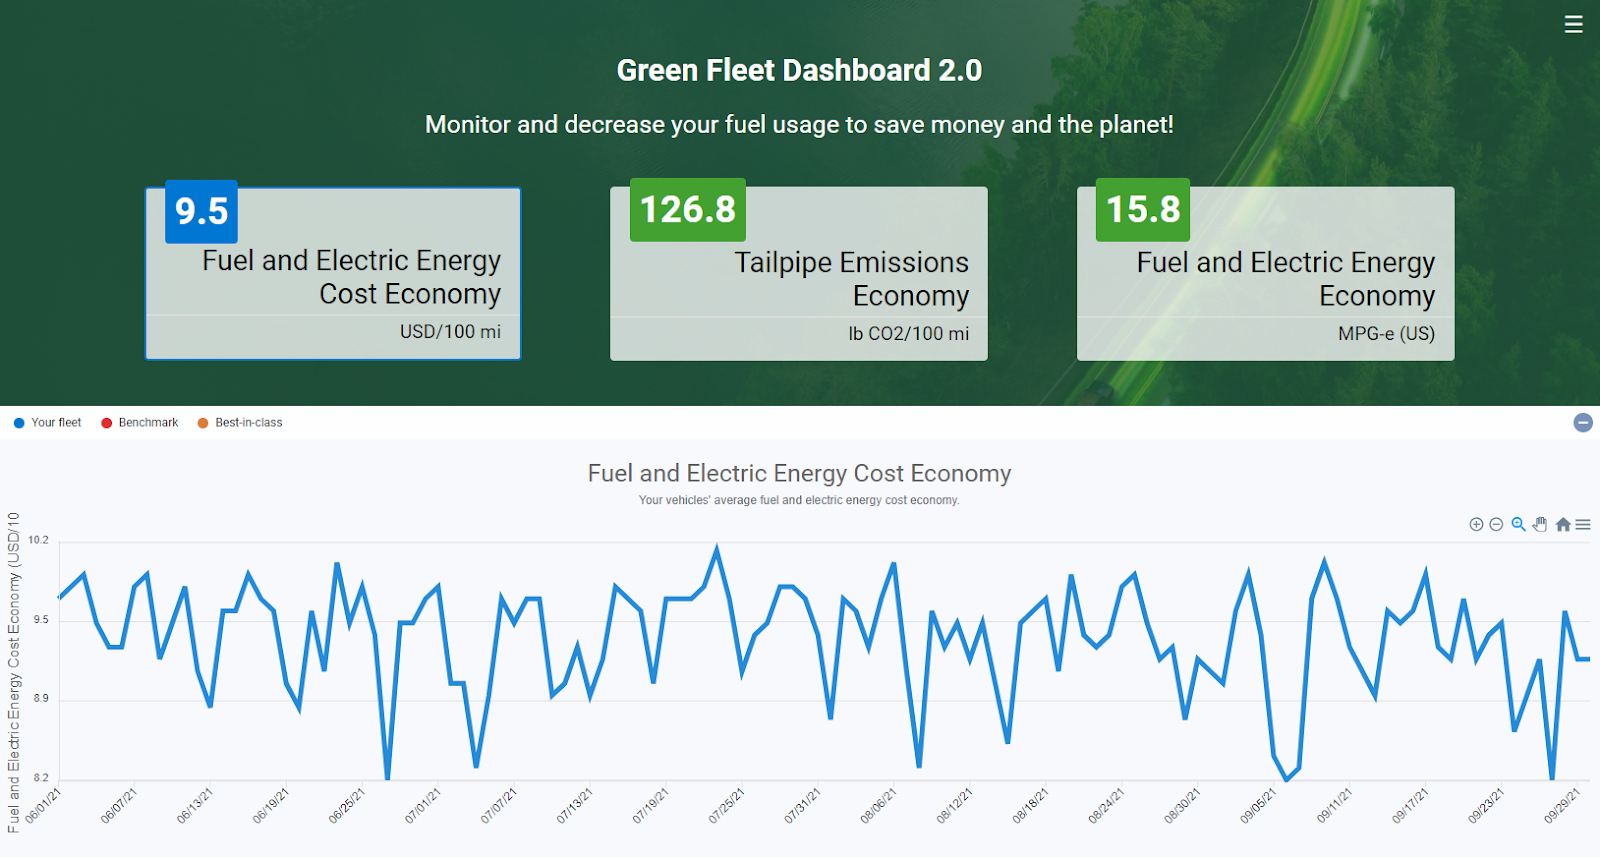 The Geotab Green Fleet Dashboard 2.0 reveals fuel and electric energy cost economy trends.